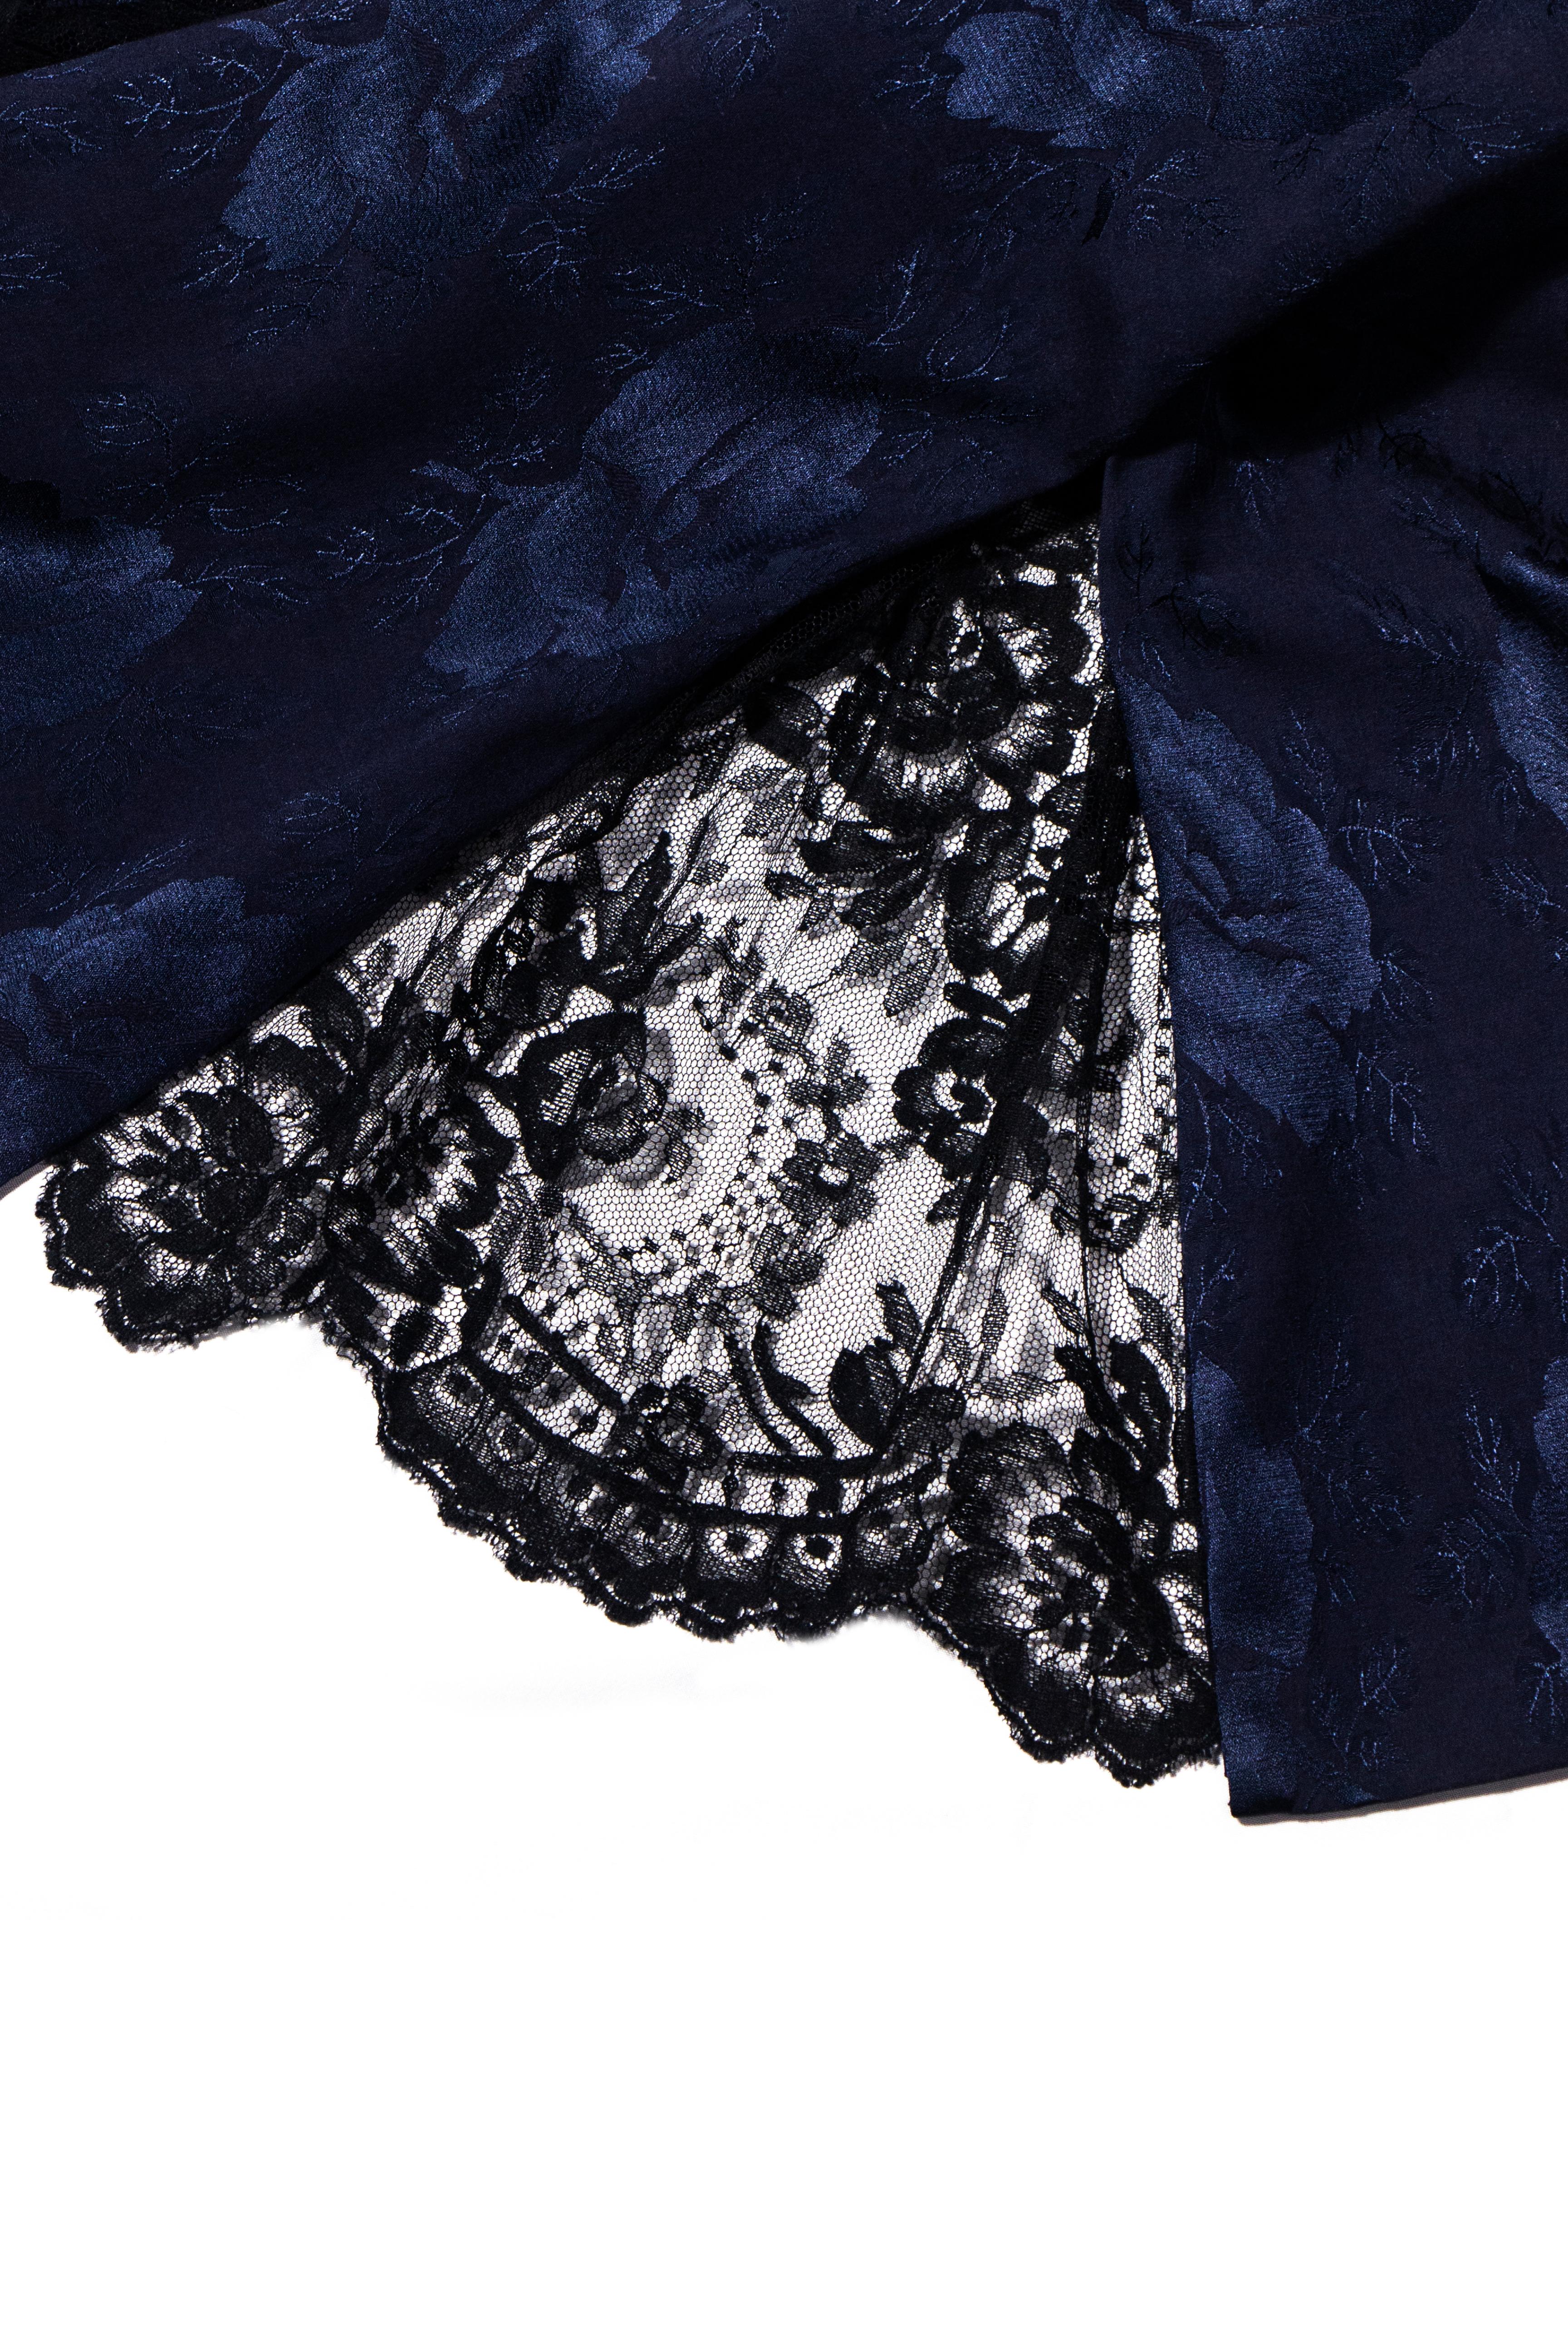 Christian Dior by John Galliano navy silk brocade & lace skirt, fw 1997 For Sale 4